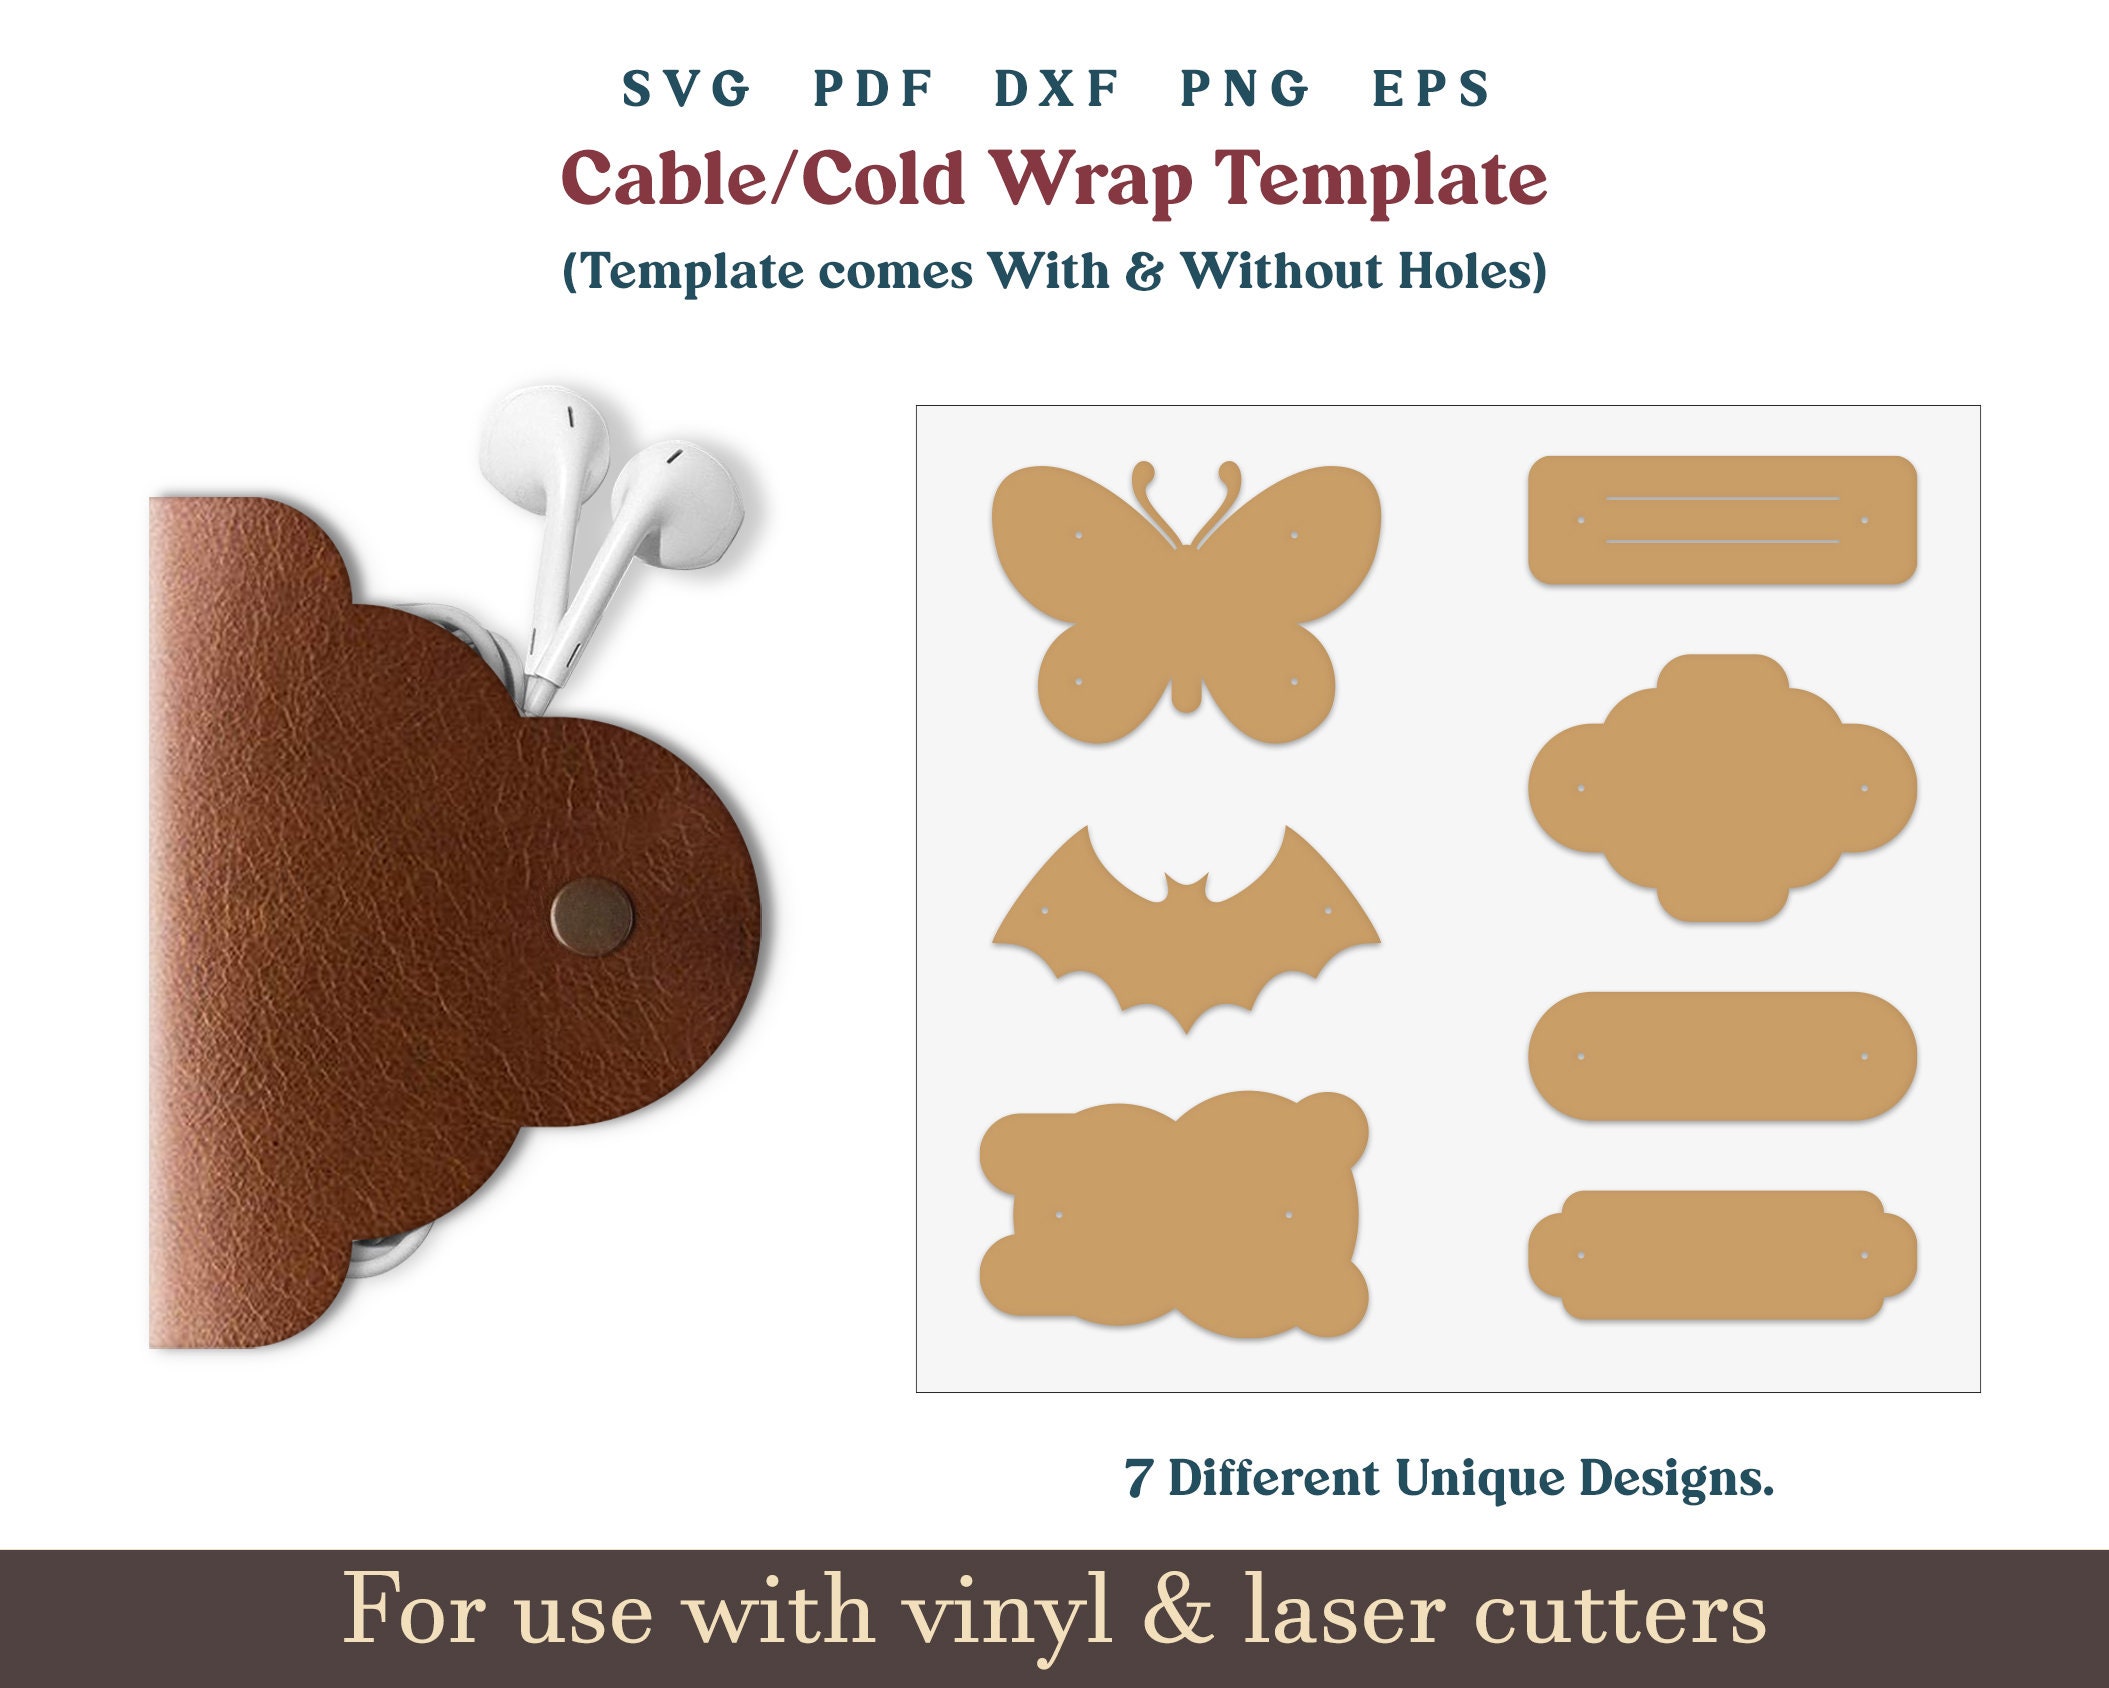 Making A Set of Leather Cord Wraps - Free PDF Template Set